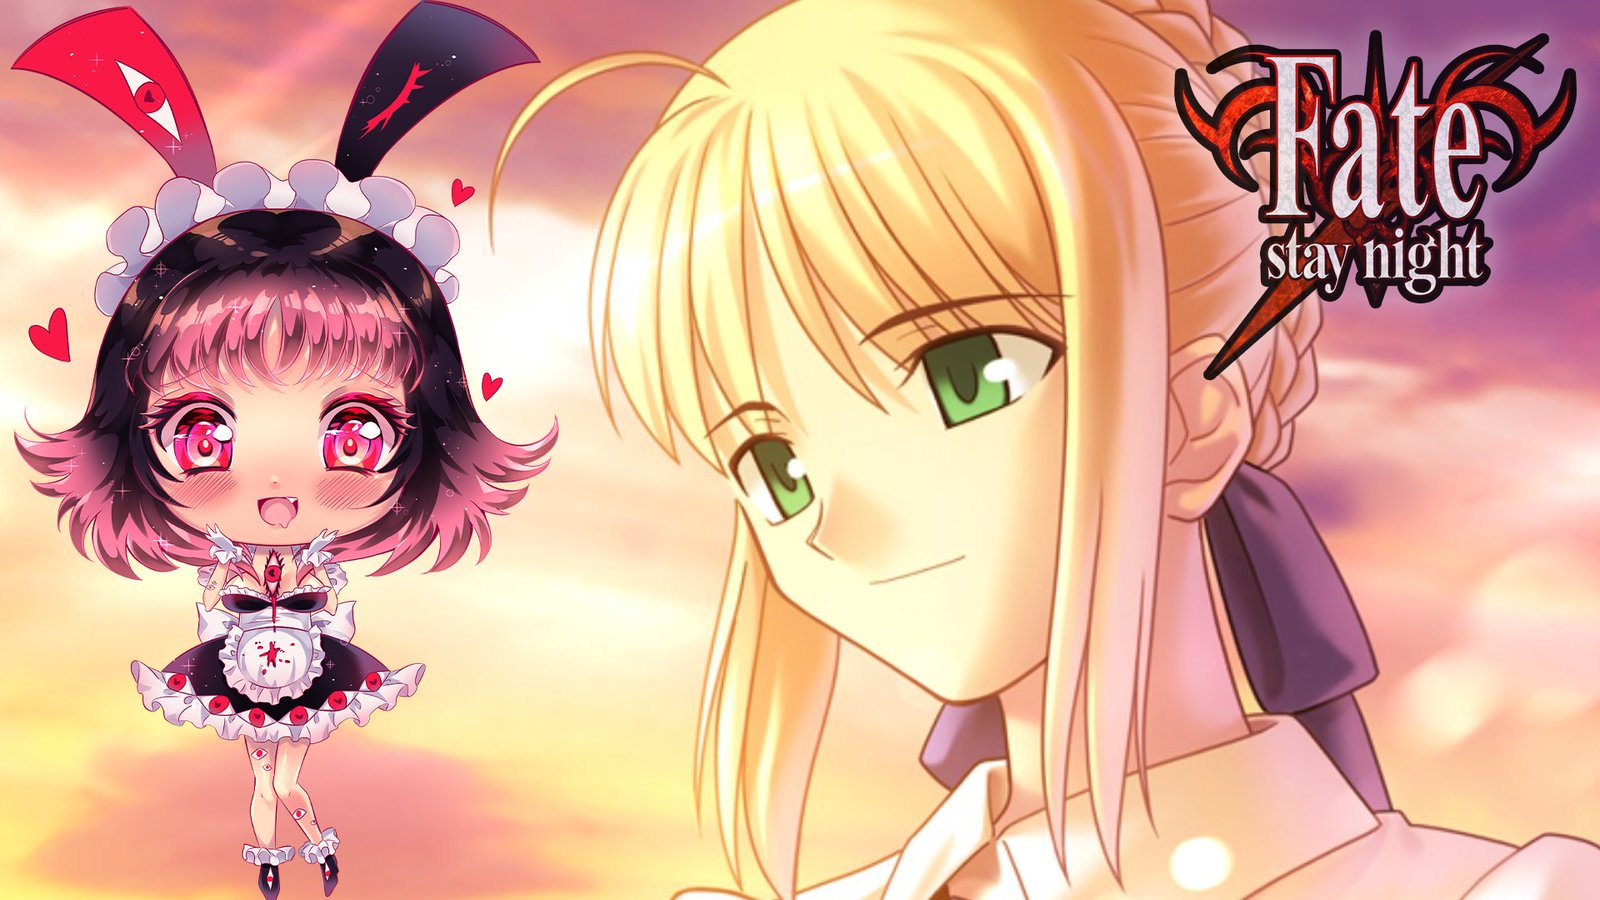 Saber The Grail Fate Stay Night Visual Novel Review Chaos Cute Soft